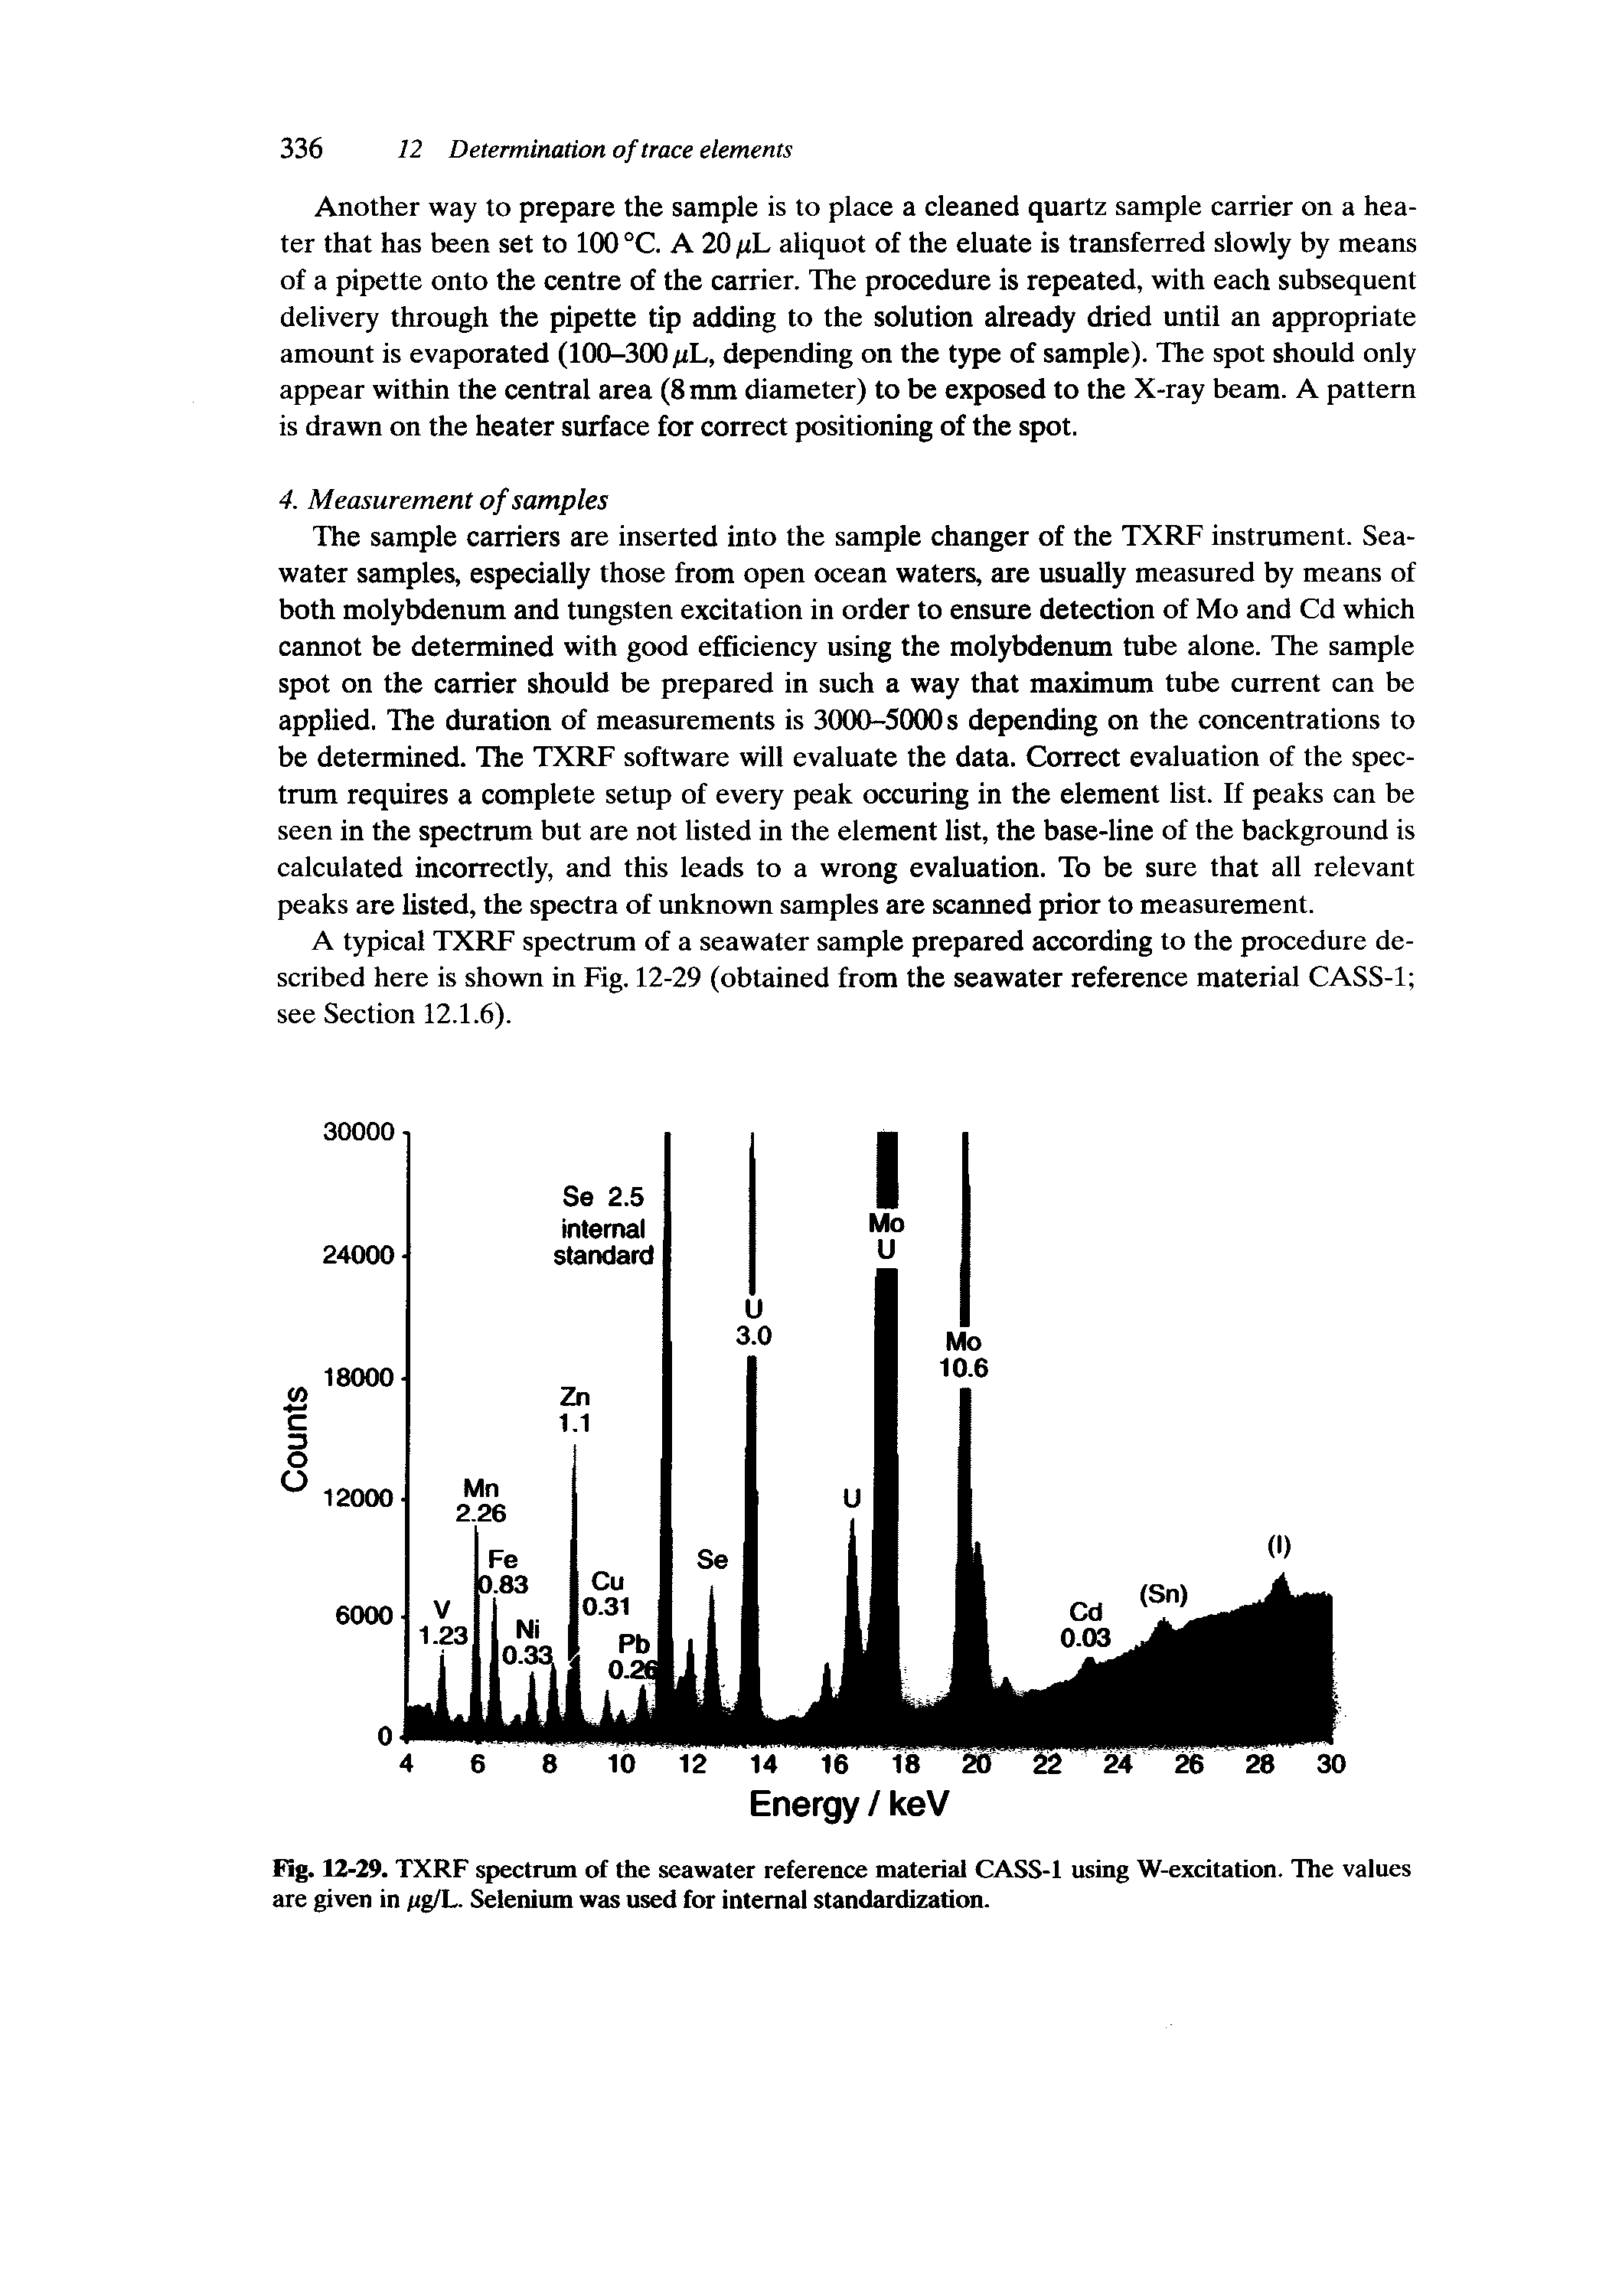 Fig. 12-29. TXRF spectrum of the seawater reference material CASS-1 using W-excitation. The values are given in /<g/L. Selenium was used for internal standardization.